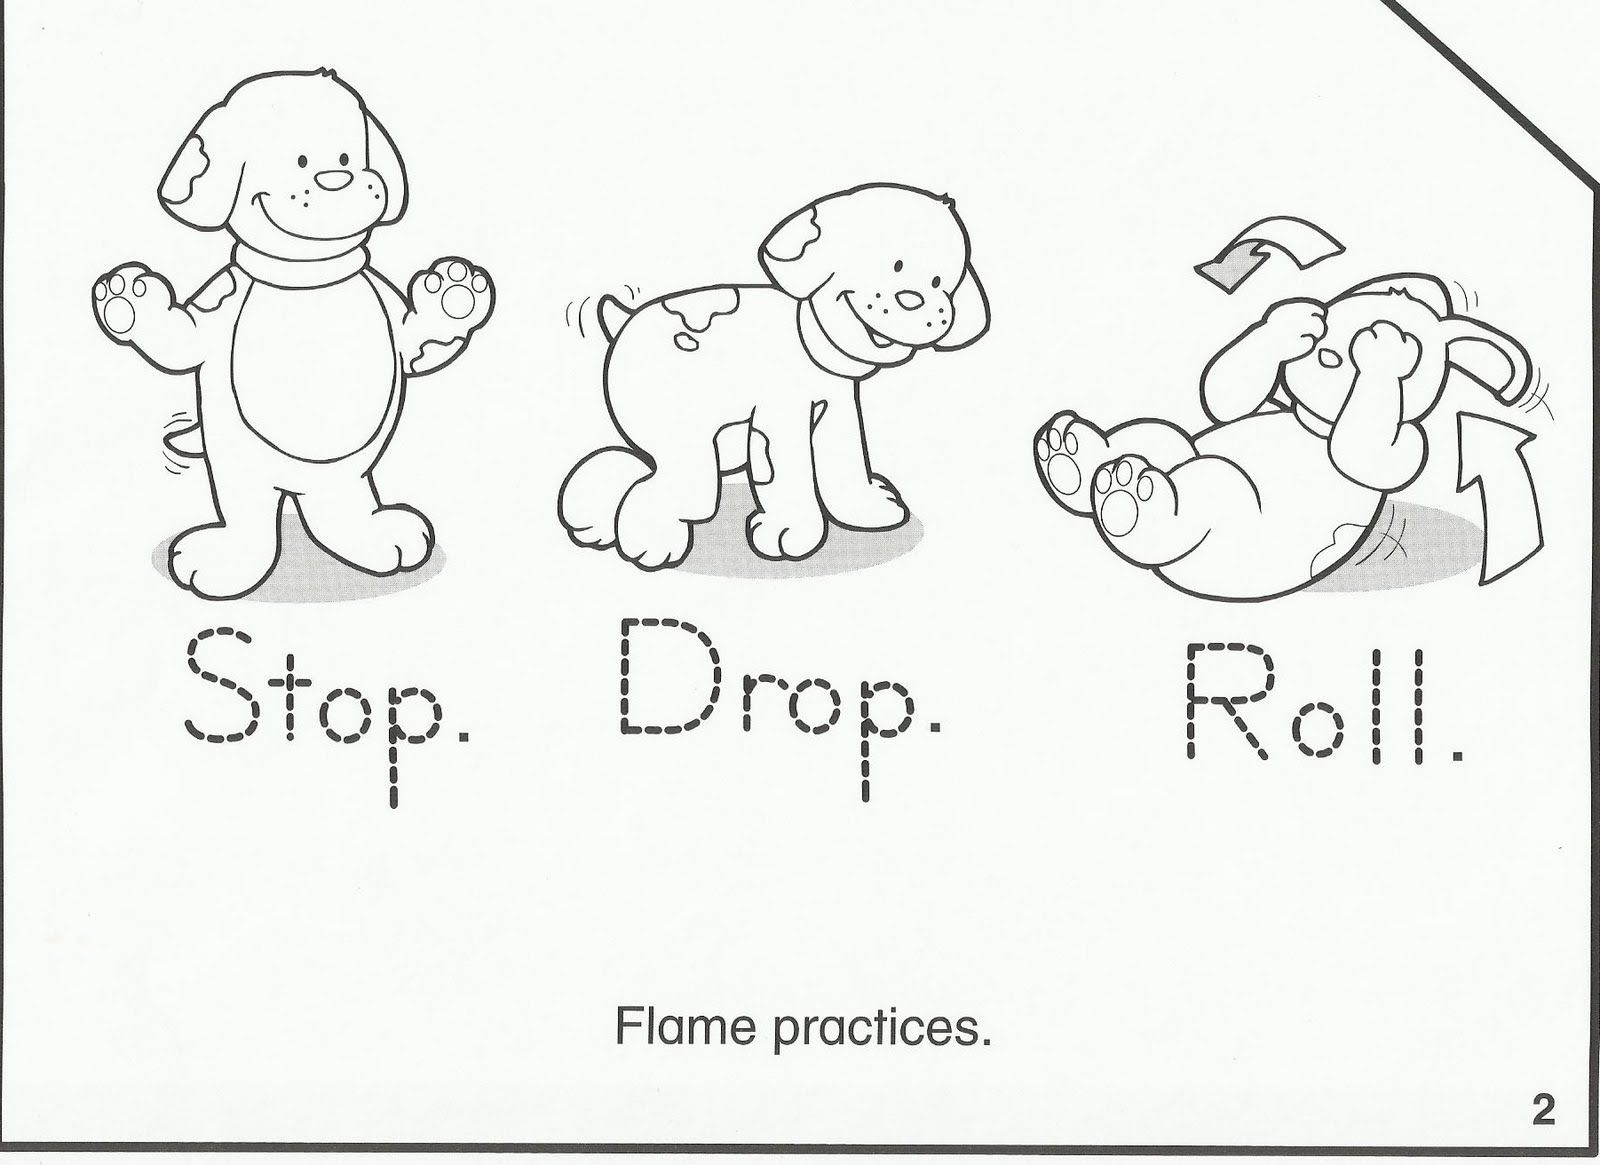 Stop, drop and roll fire safety pictographs